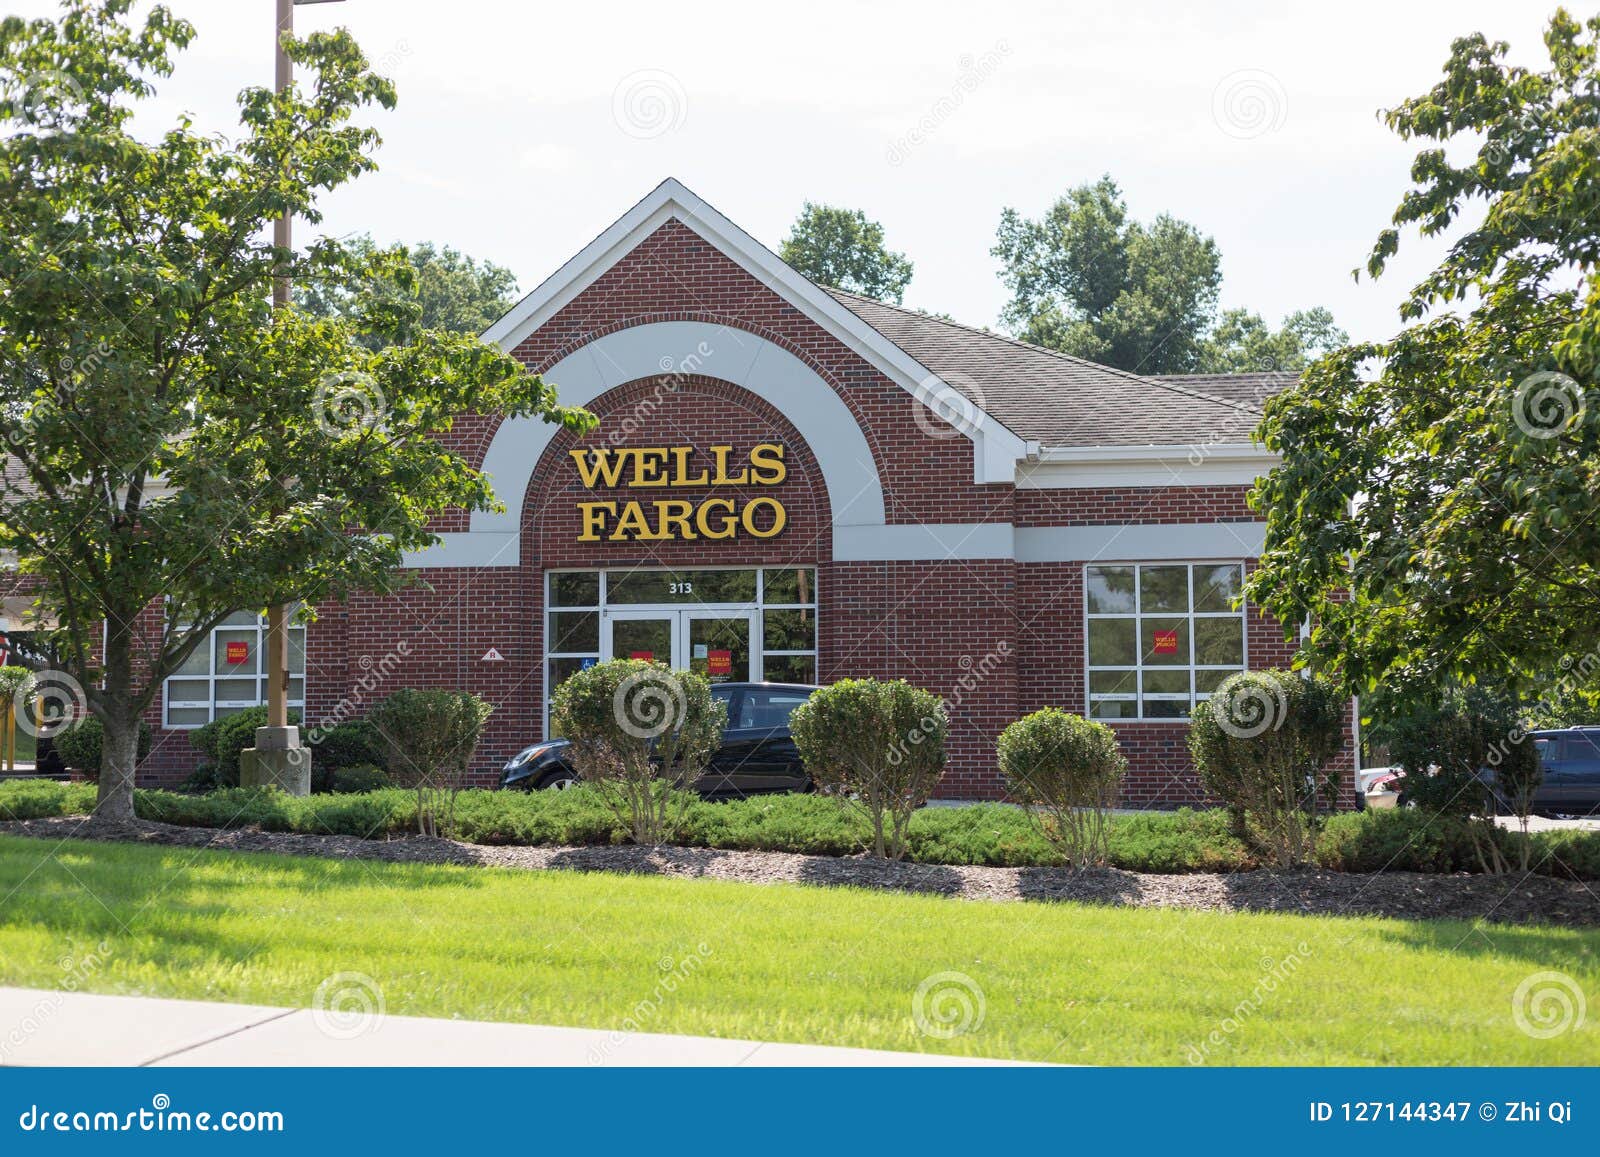 Wells Fargo Bank Entrance With Sign Editorial Photography Image Of Exterior Urban 127144347